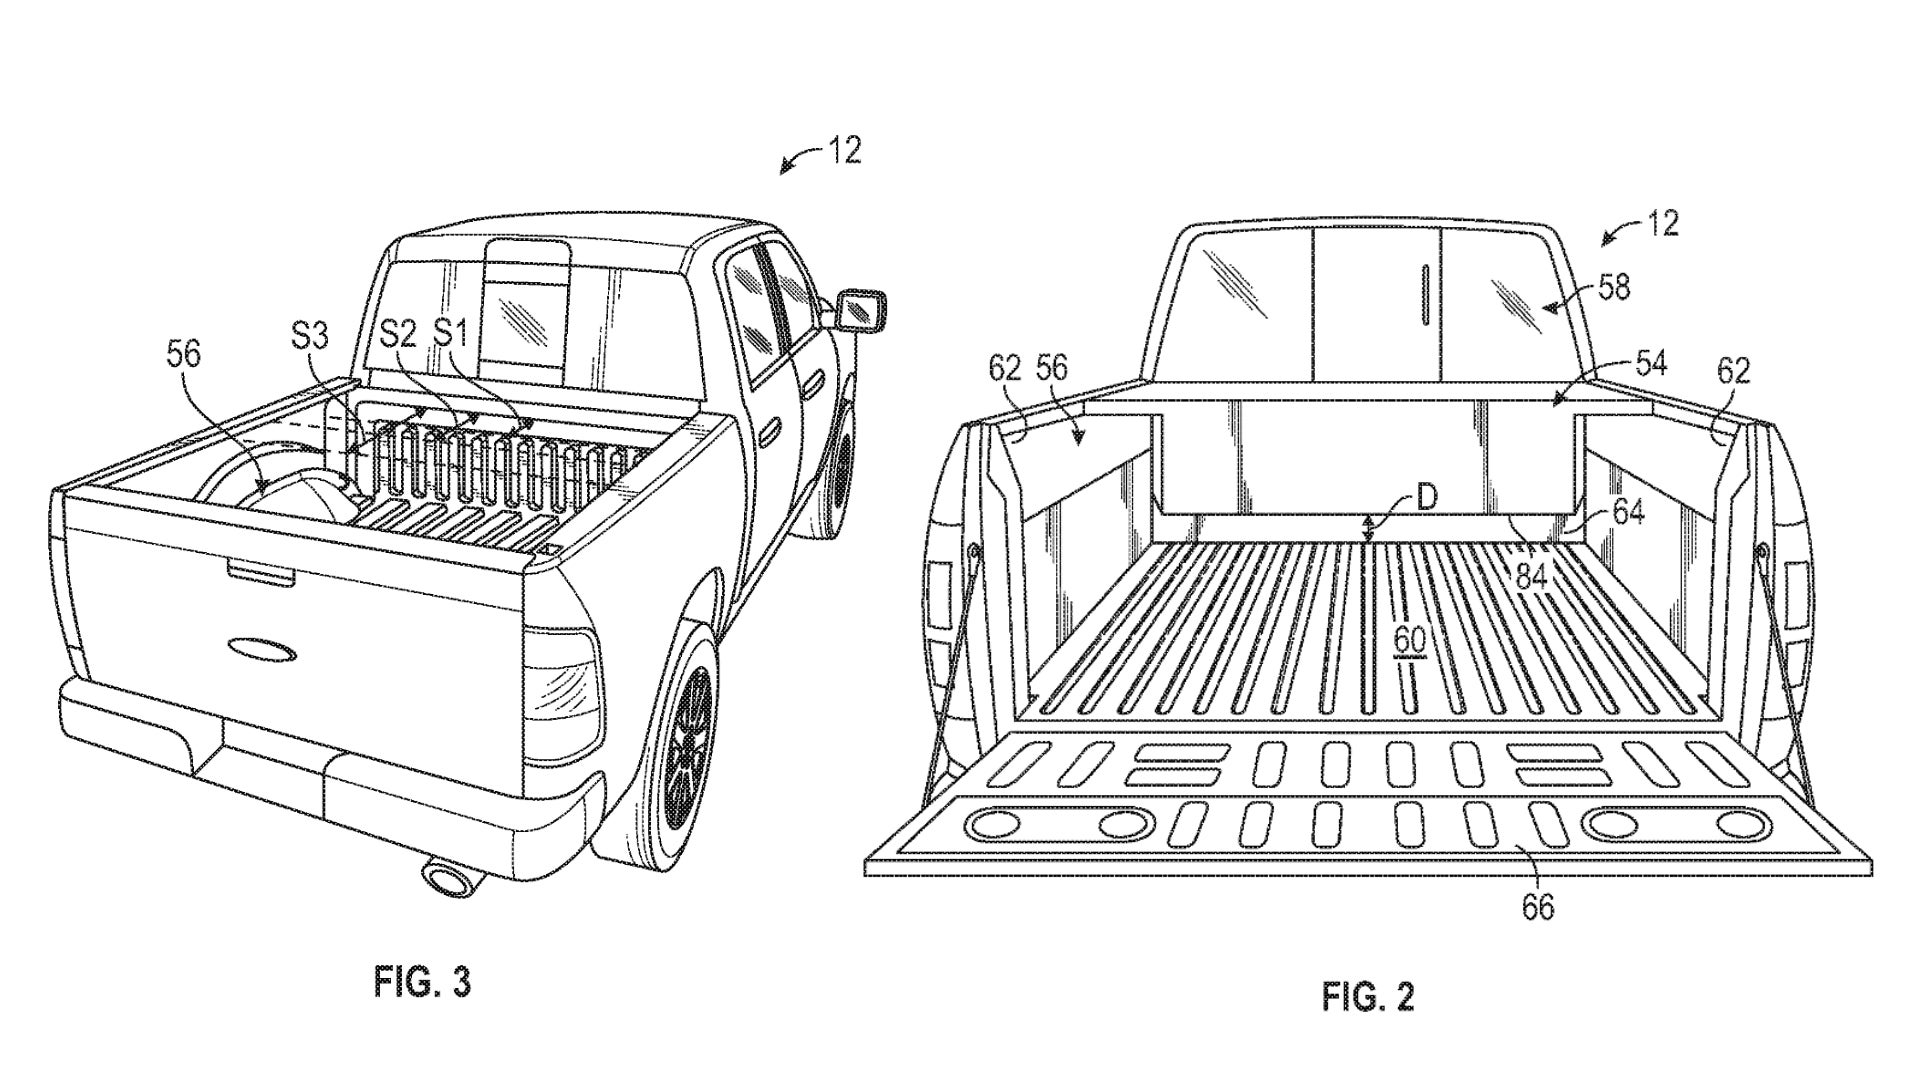 Electric Ford F-150 Patent Drawings Show Swappable, Range-Extending Gas Generator Disguised as Toolbox